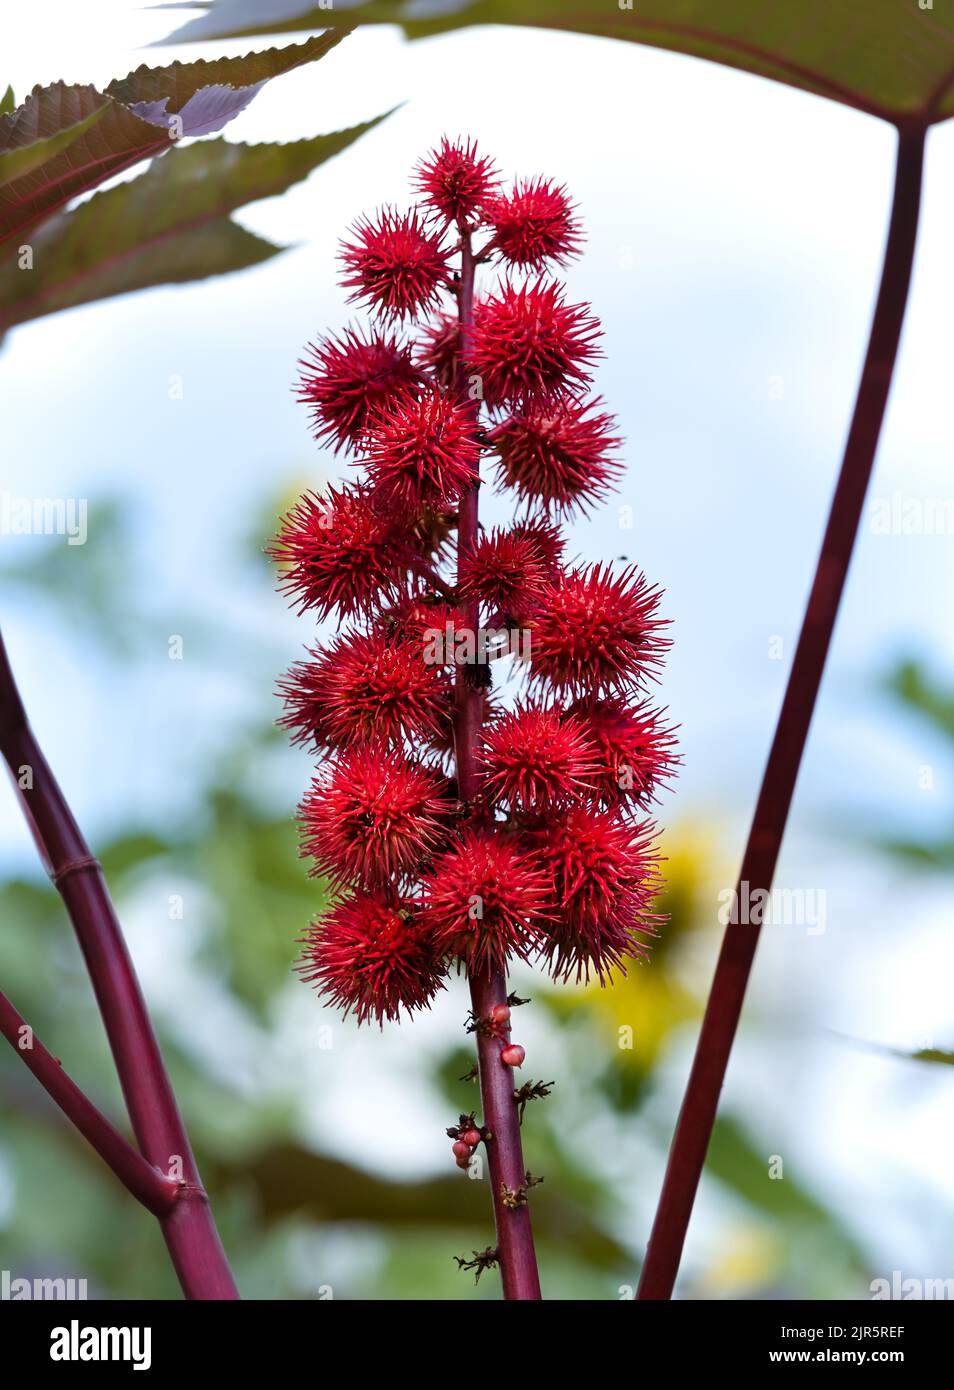 A red flower spike of the castor oil plant, Ricinus communis, against a blue sky in summer or fall, Lancaster County, Pennsylvania Stock Photo